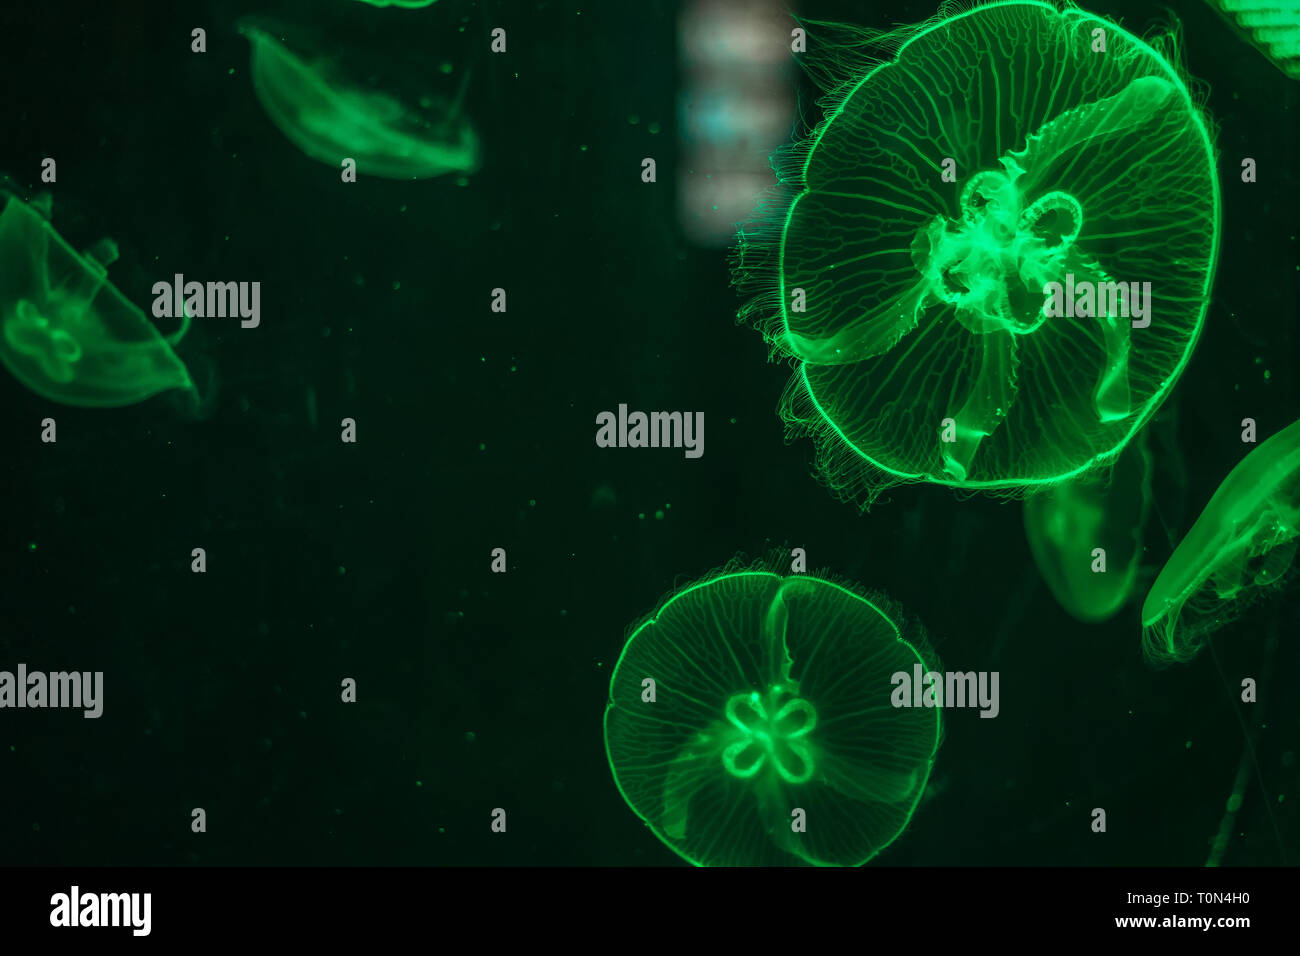 Glowing jellyfish close-up in the aquarium green color. Stock Photo